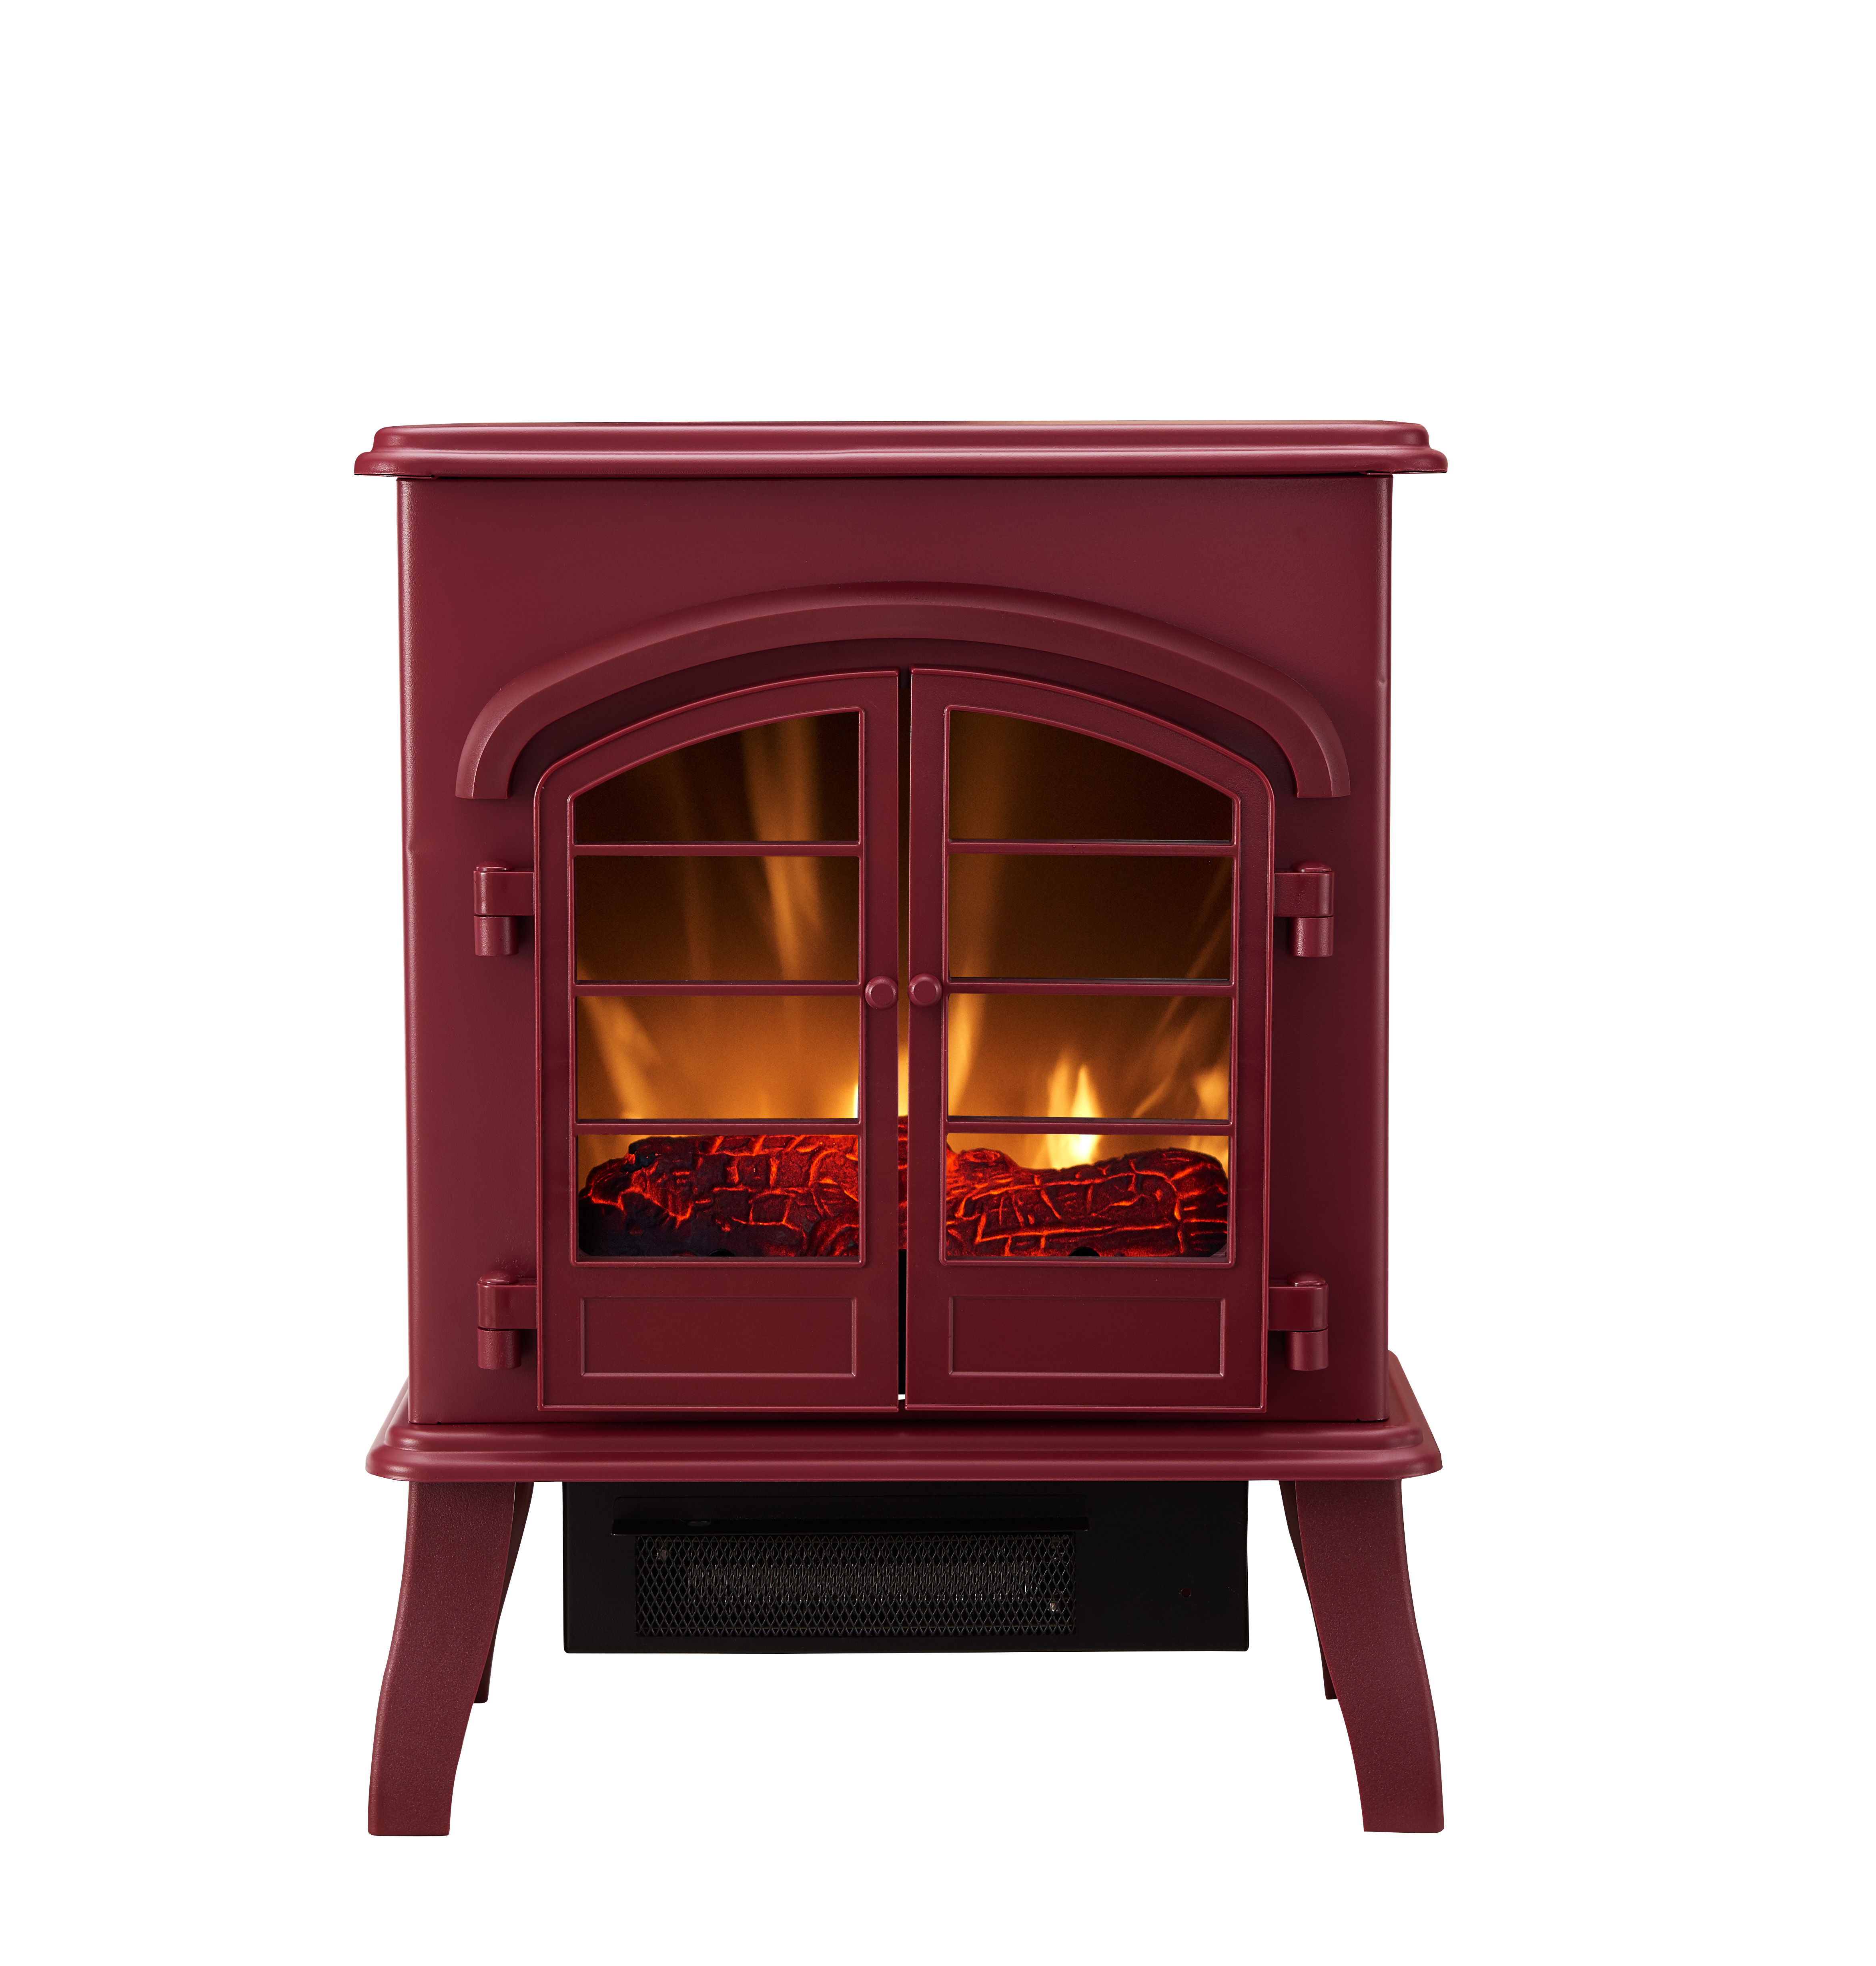 Bold Flame Electric Space Heater, Glossy Red - image 3 of 7